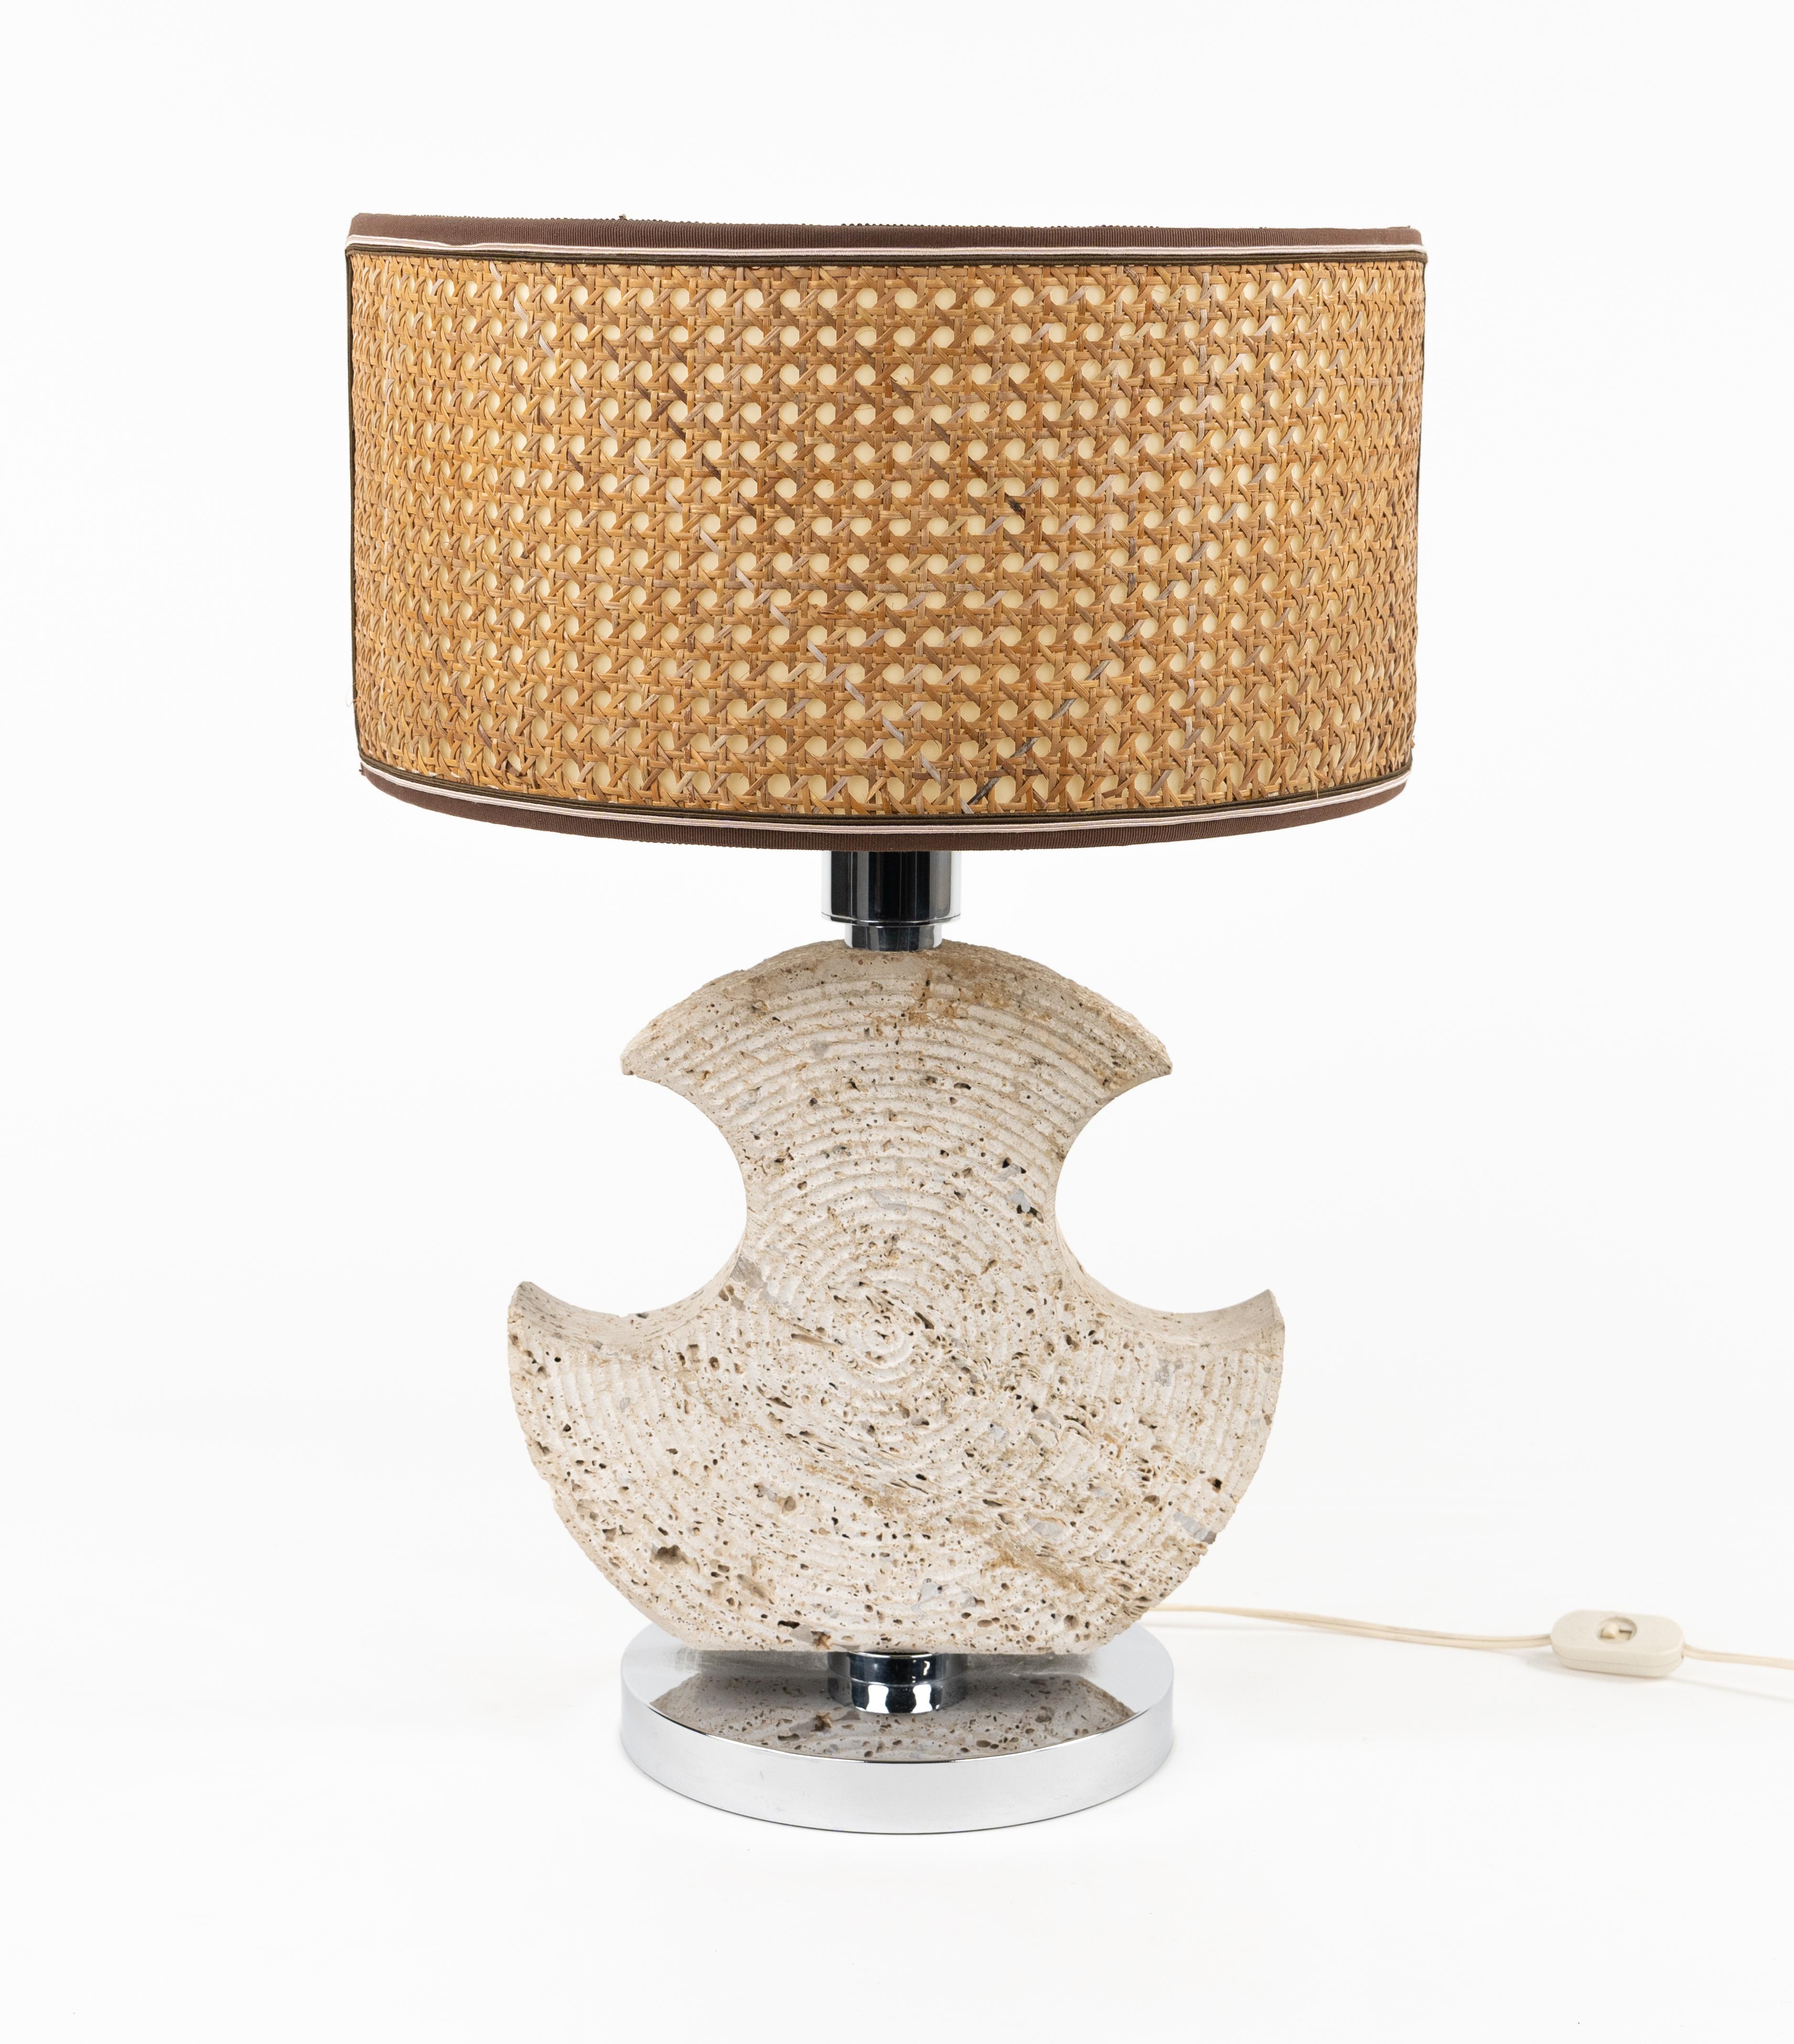 Midcentury amazing table lamp in travertine and chrome whit wicker and fabric  lampshade by Studio CE. VA Milan.

Made in Italy in the 1970s.

A beautiful lamp that is perfectly working but most of all, it provides an amazing visual impact in every